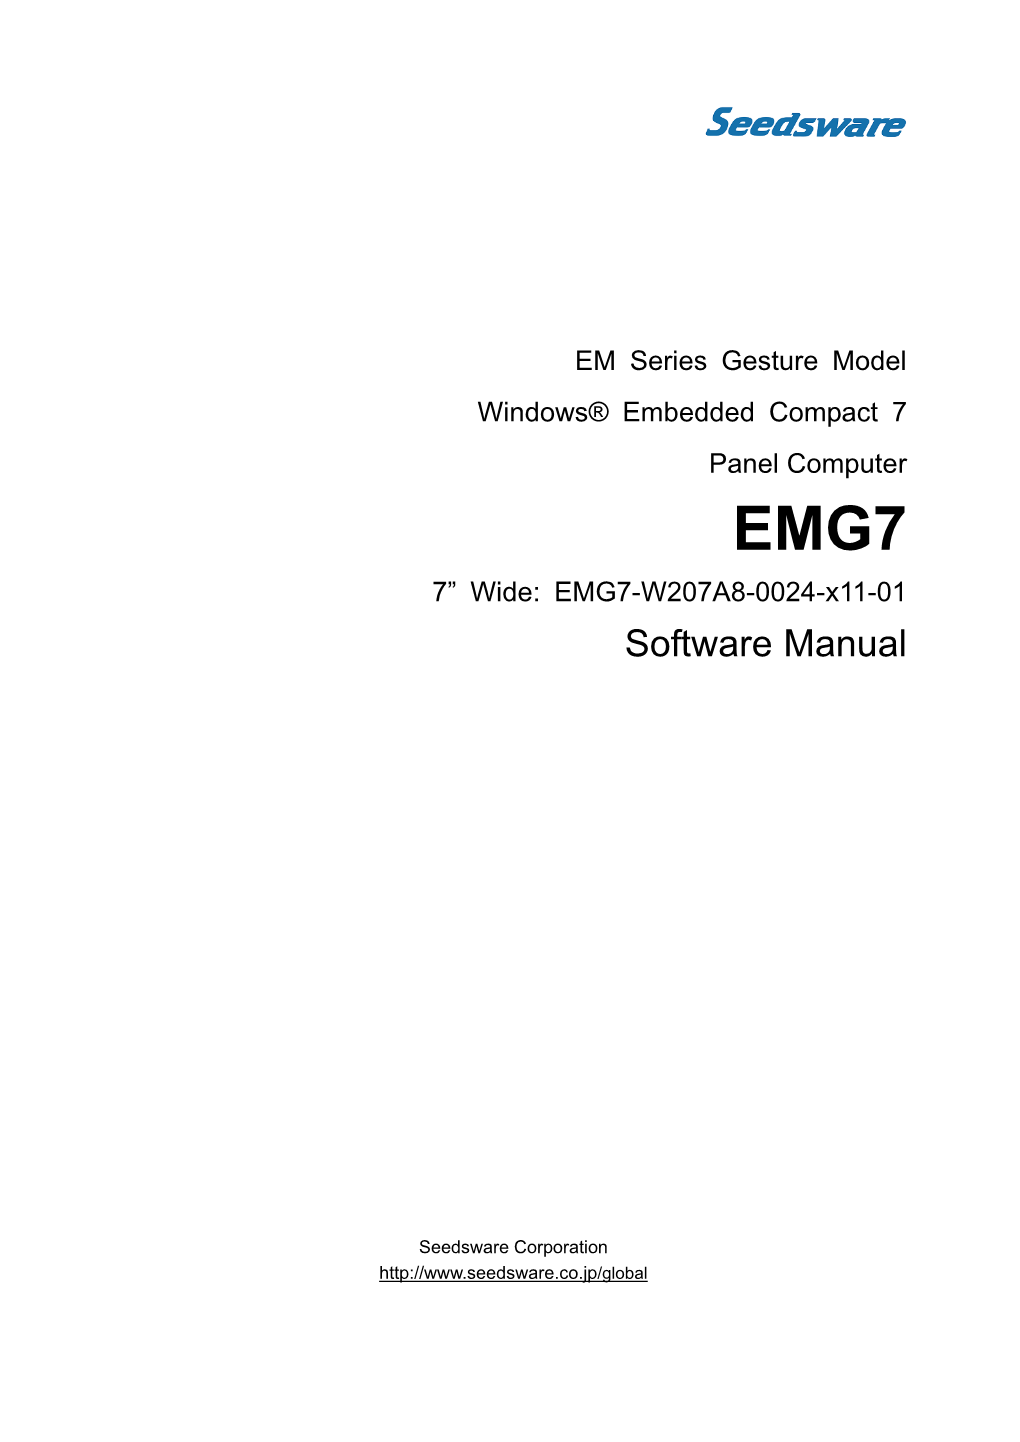 Windows Embedded Compact 7 Software Manual